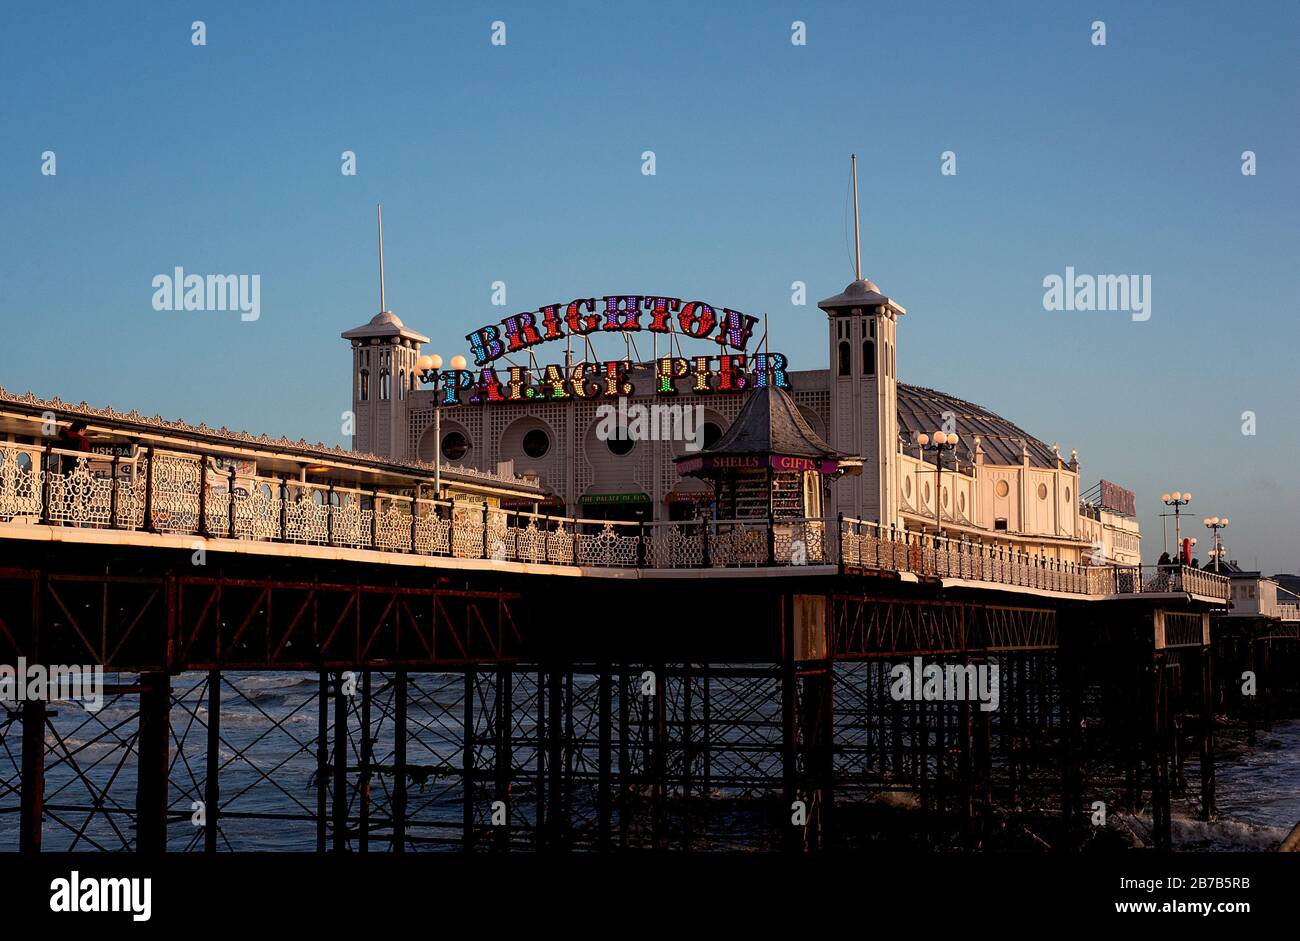 Brighton and Hove, Sussex, UK. Brighton Palace Pier on a sunny day. The famous seaside pier is one of the U.K.'s most popular tourist attractions. Stock Photo